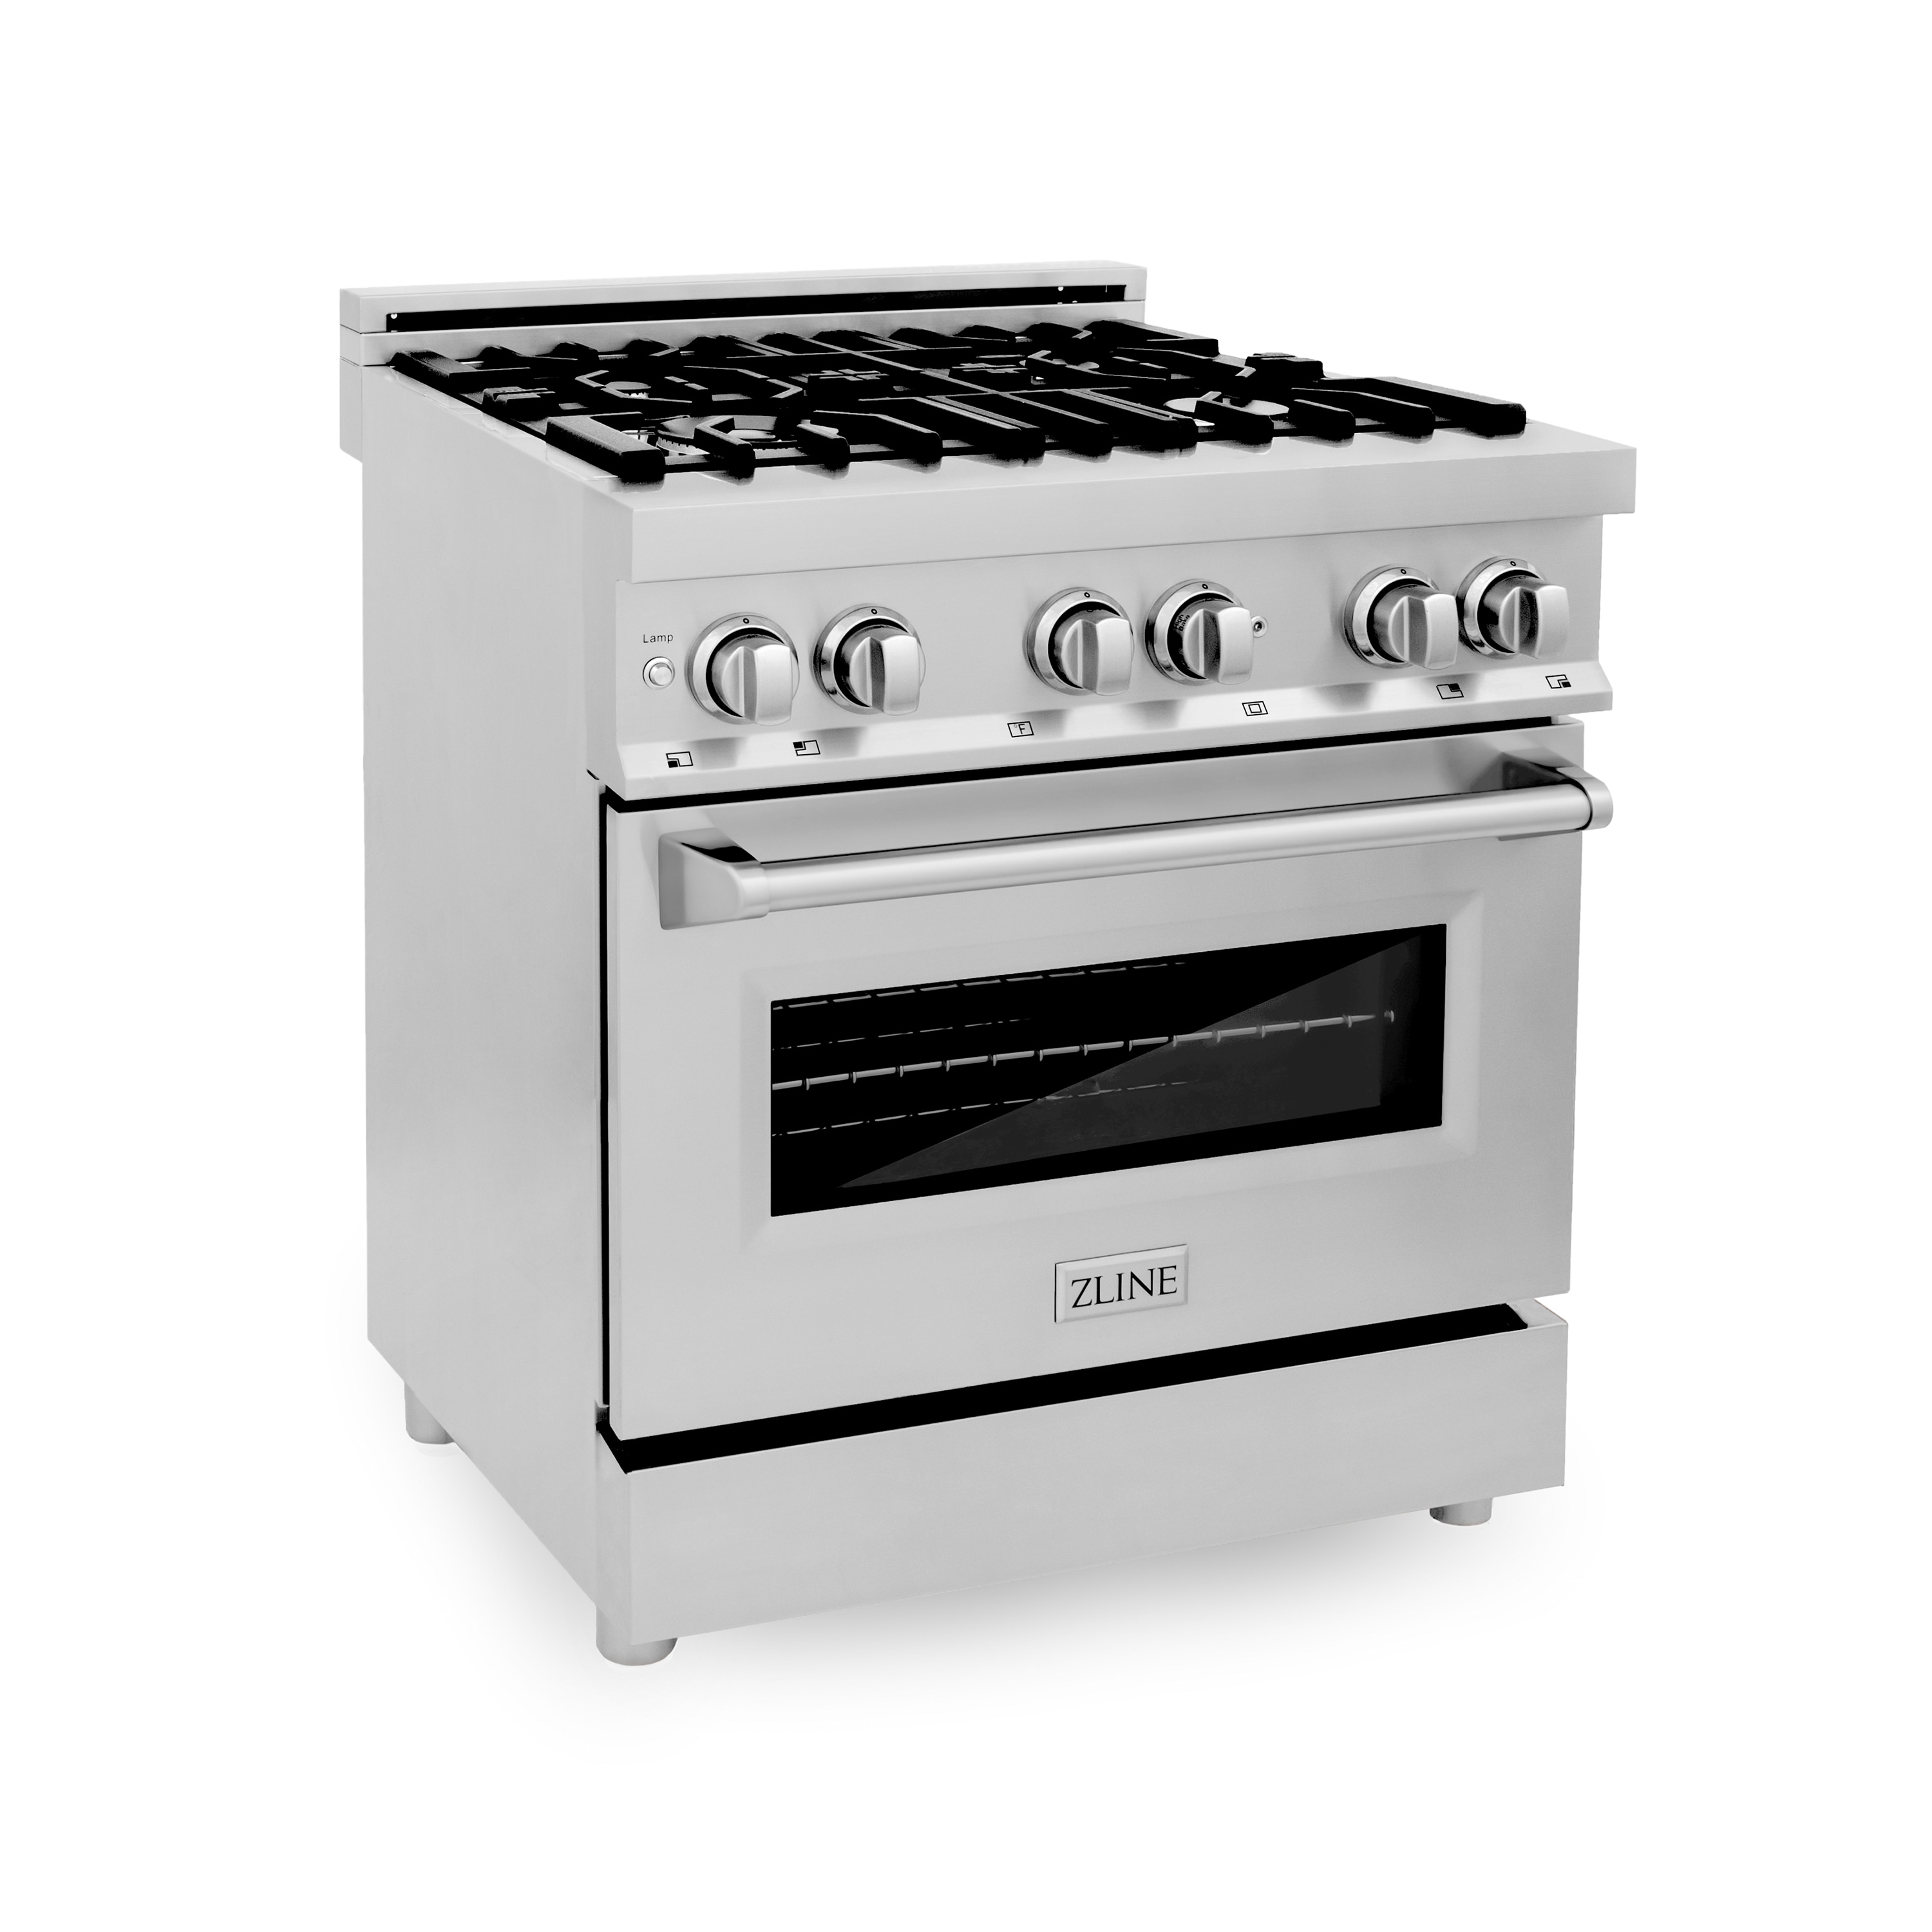 ZLINE KITCHEN & BATH Dual fuel range 30-in Deep Recessed 4 Burners Convection Oven Freestanding Dual Fuel Range (Stainless Steel) on Sale At Lowe's